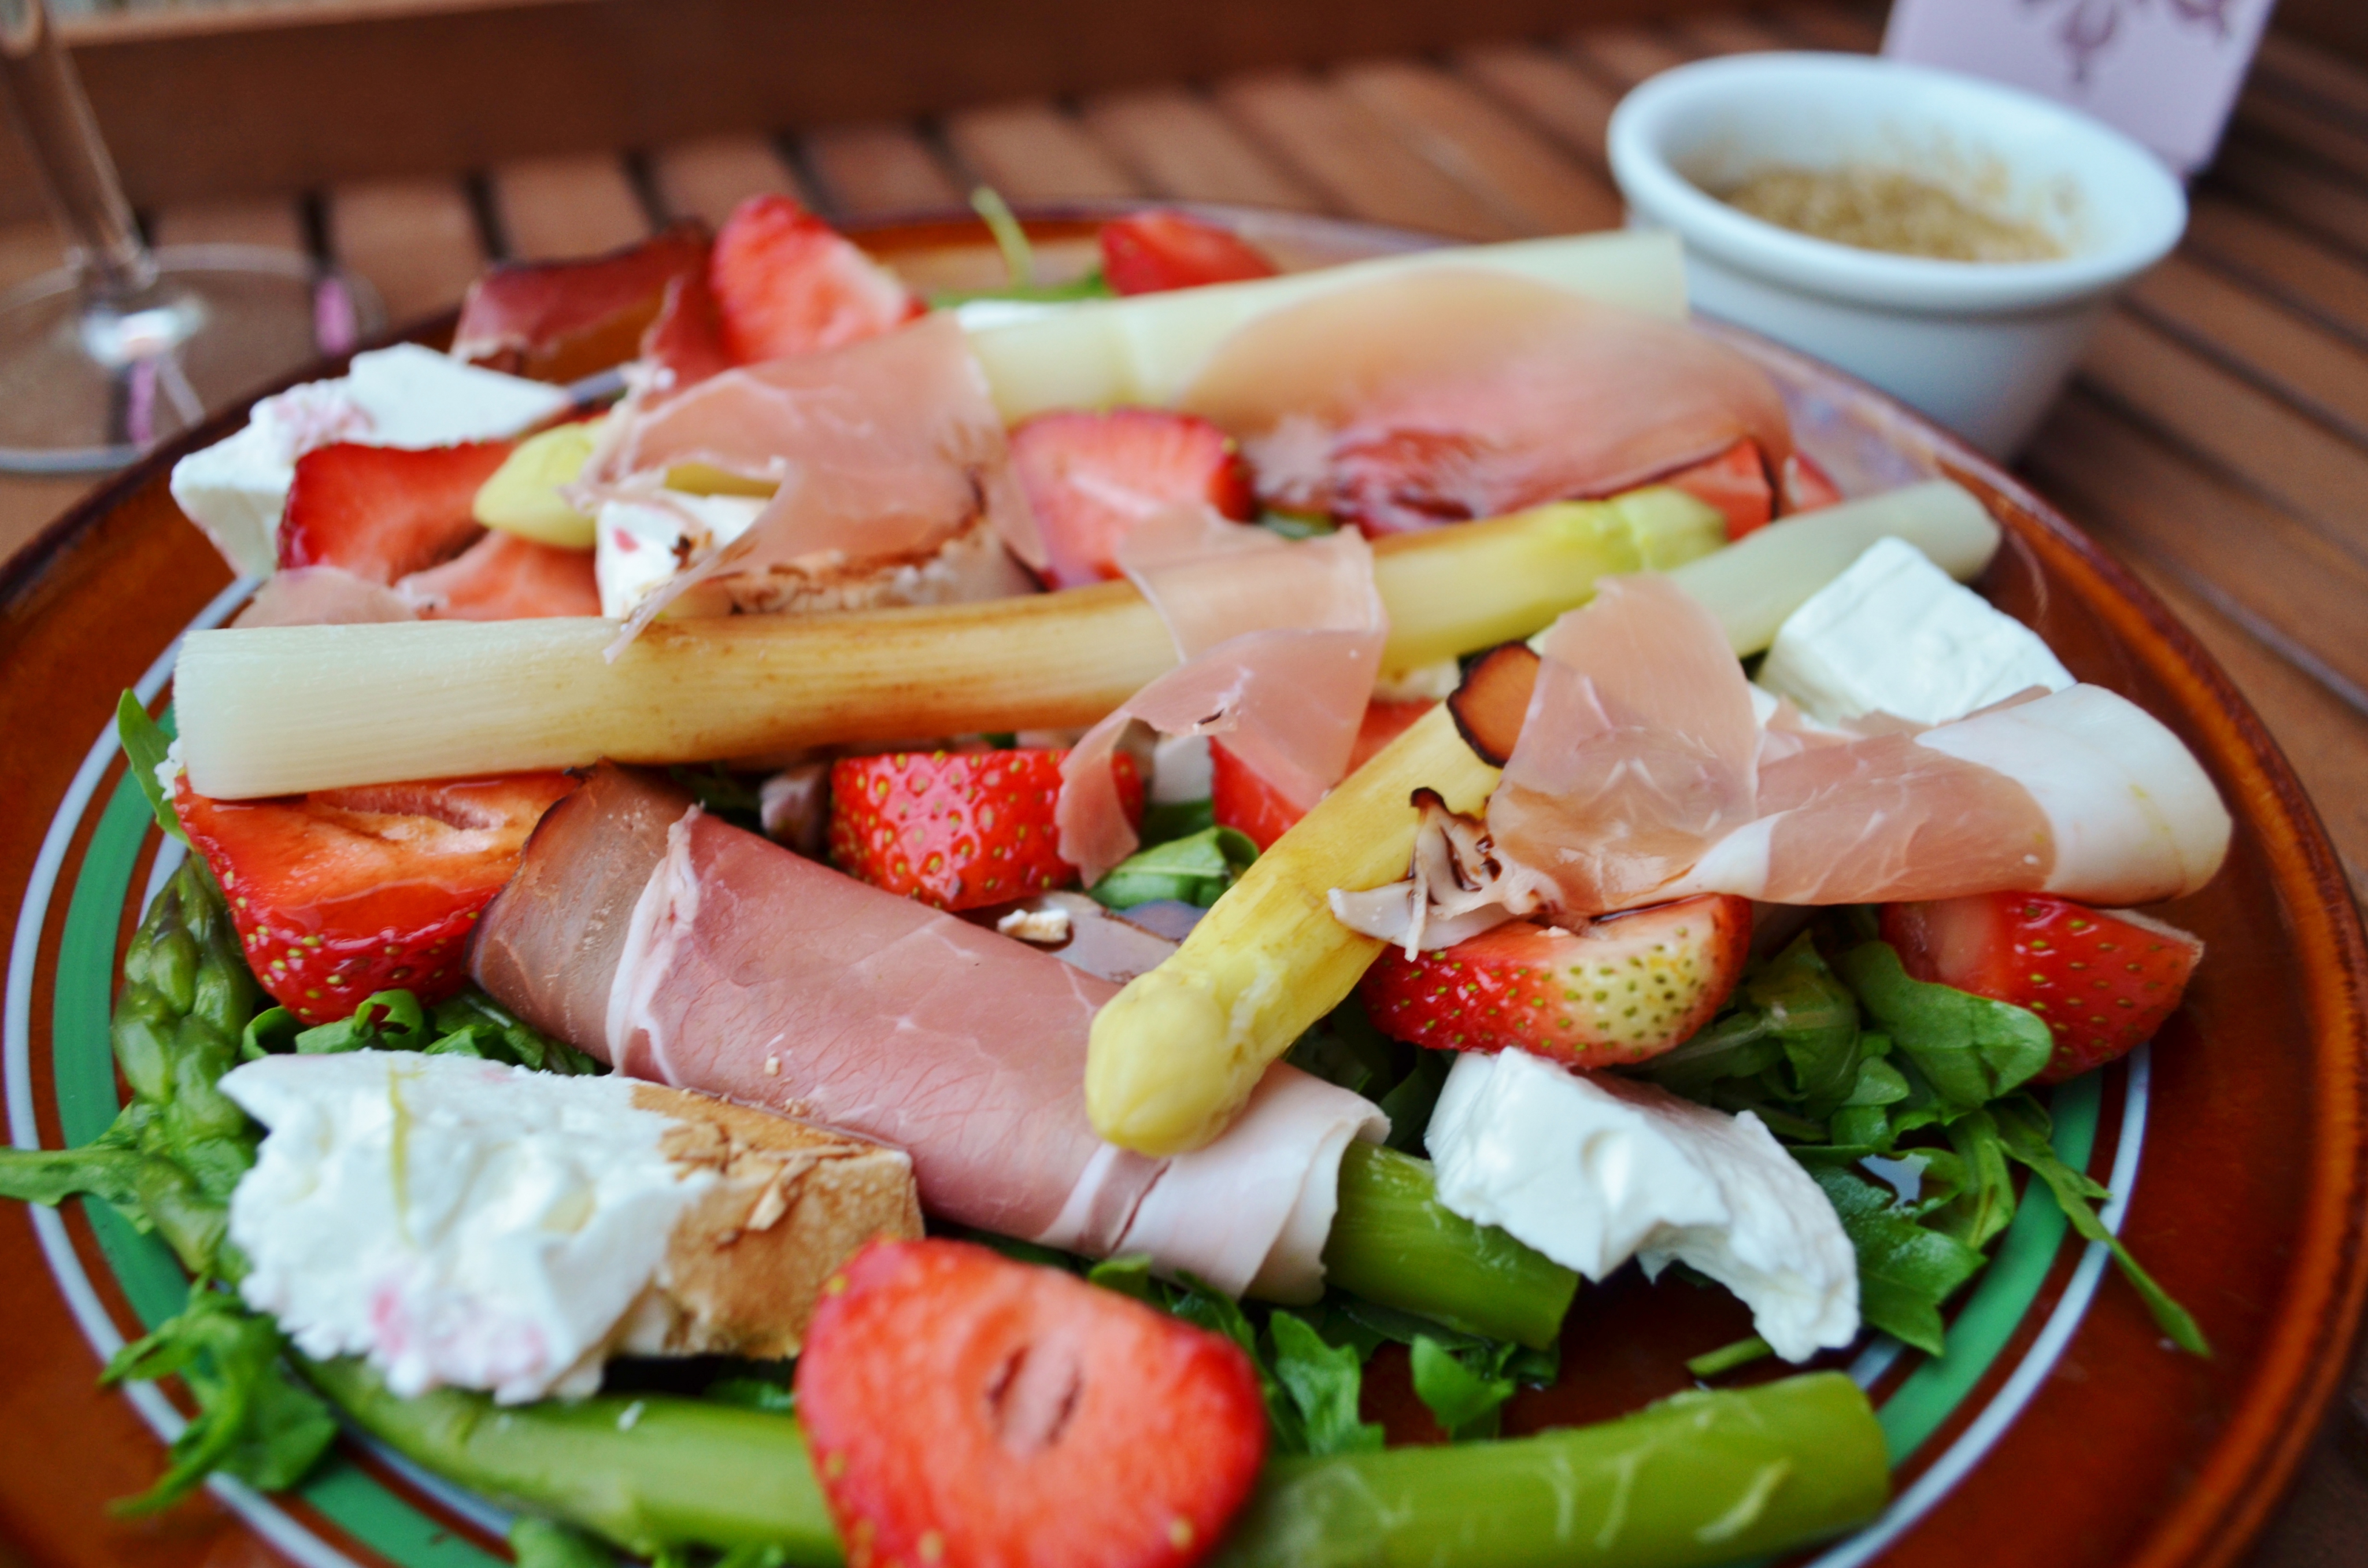 Asparagus with prosciutto, strawberries and goat cheese!